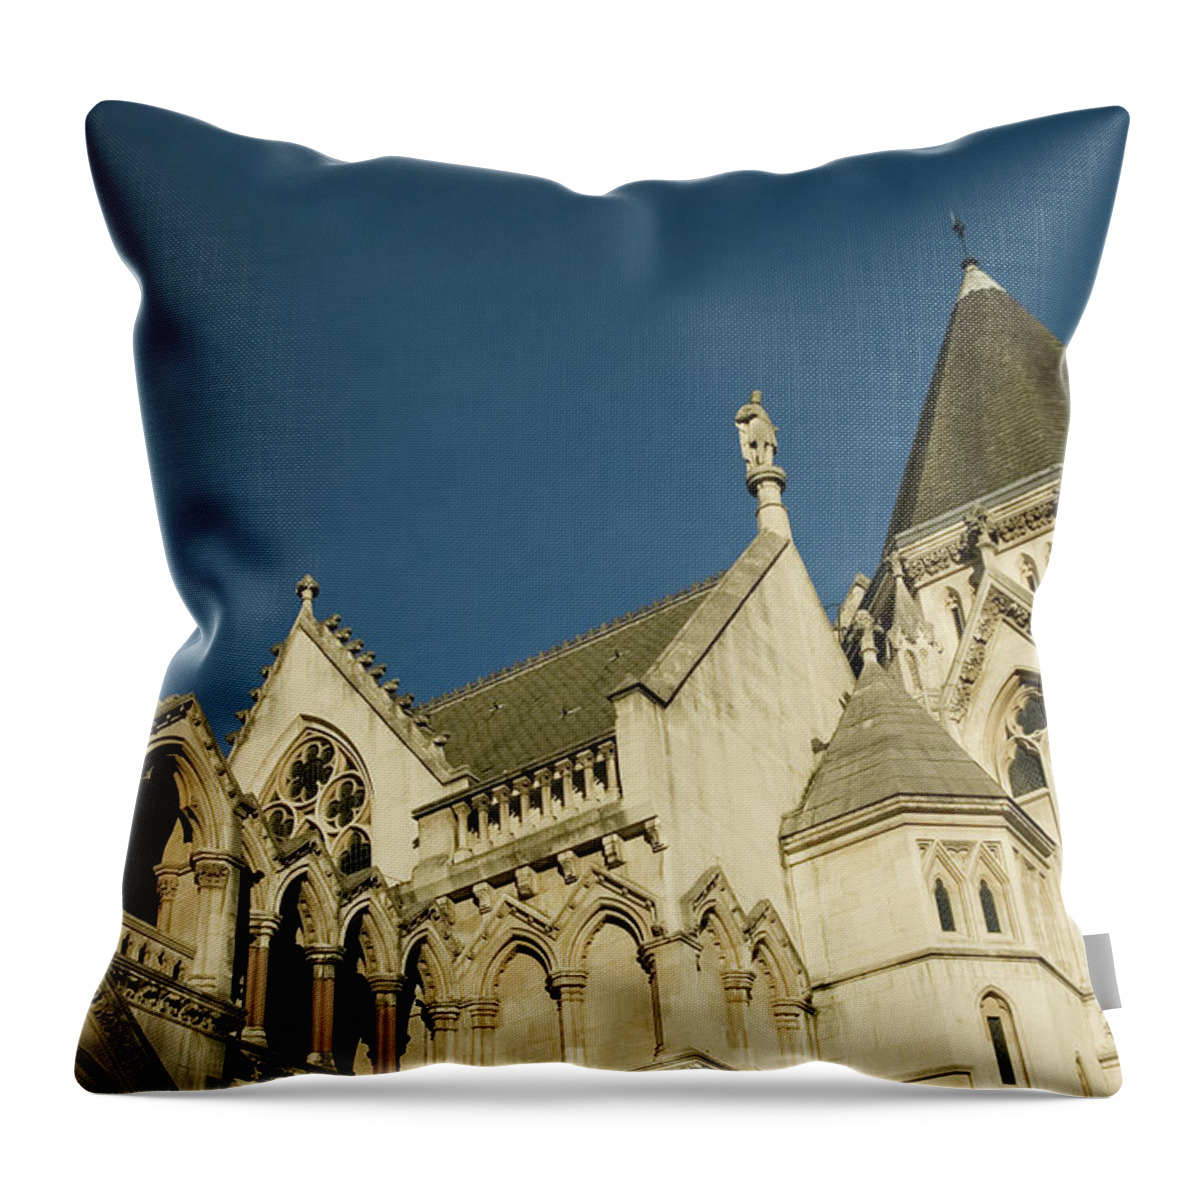 Gothic Style Throw Pillow featuring the photograph Royal Courts Of Justice London by Rmax